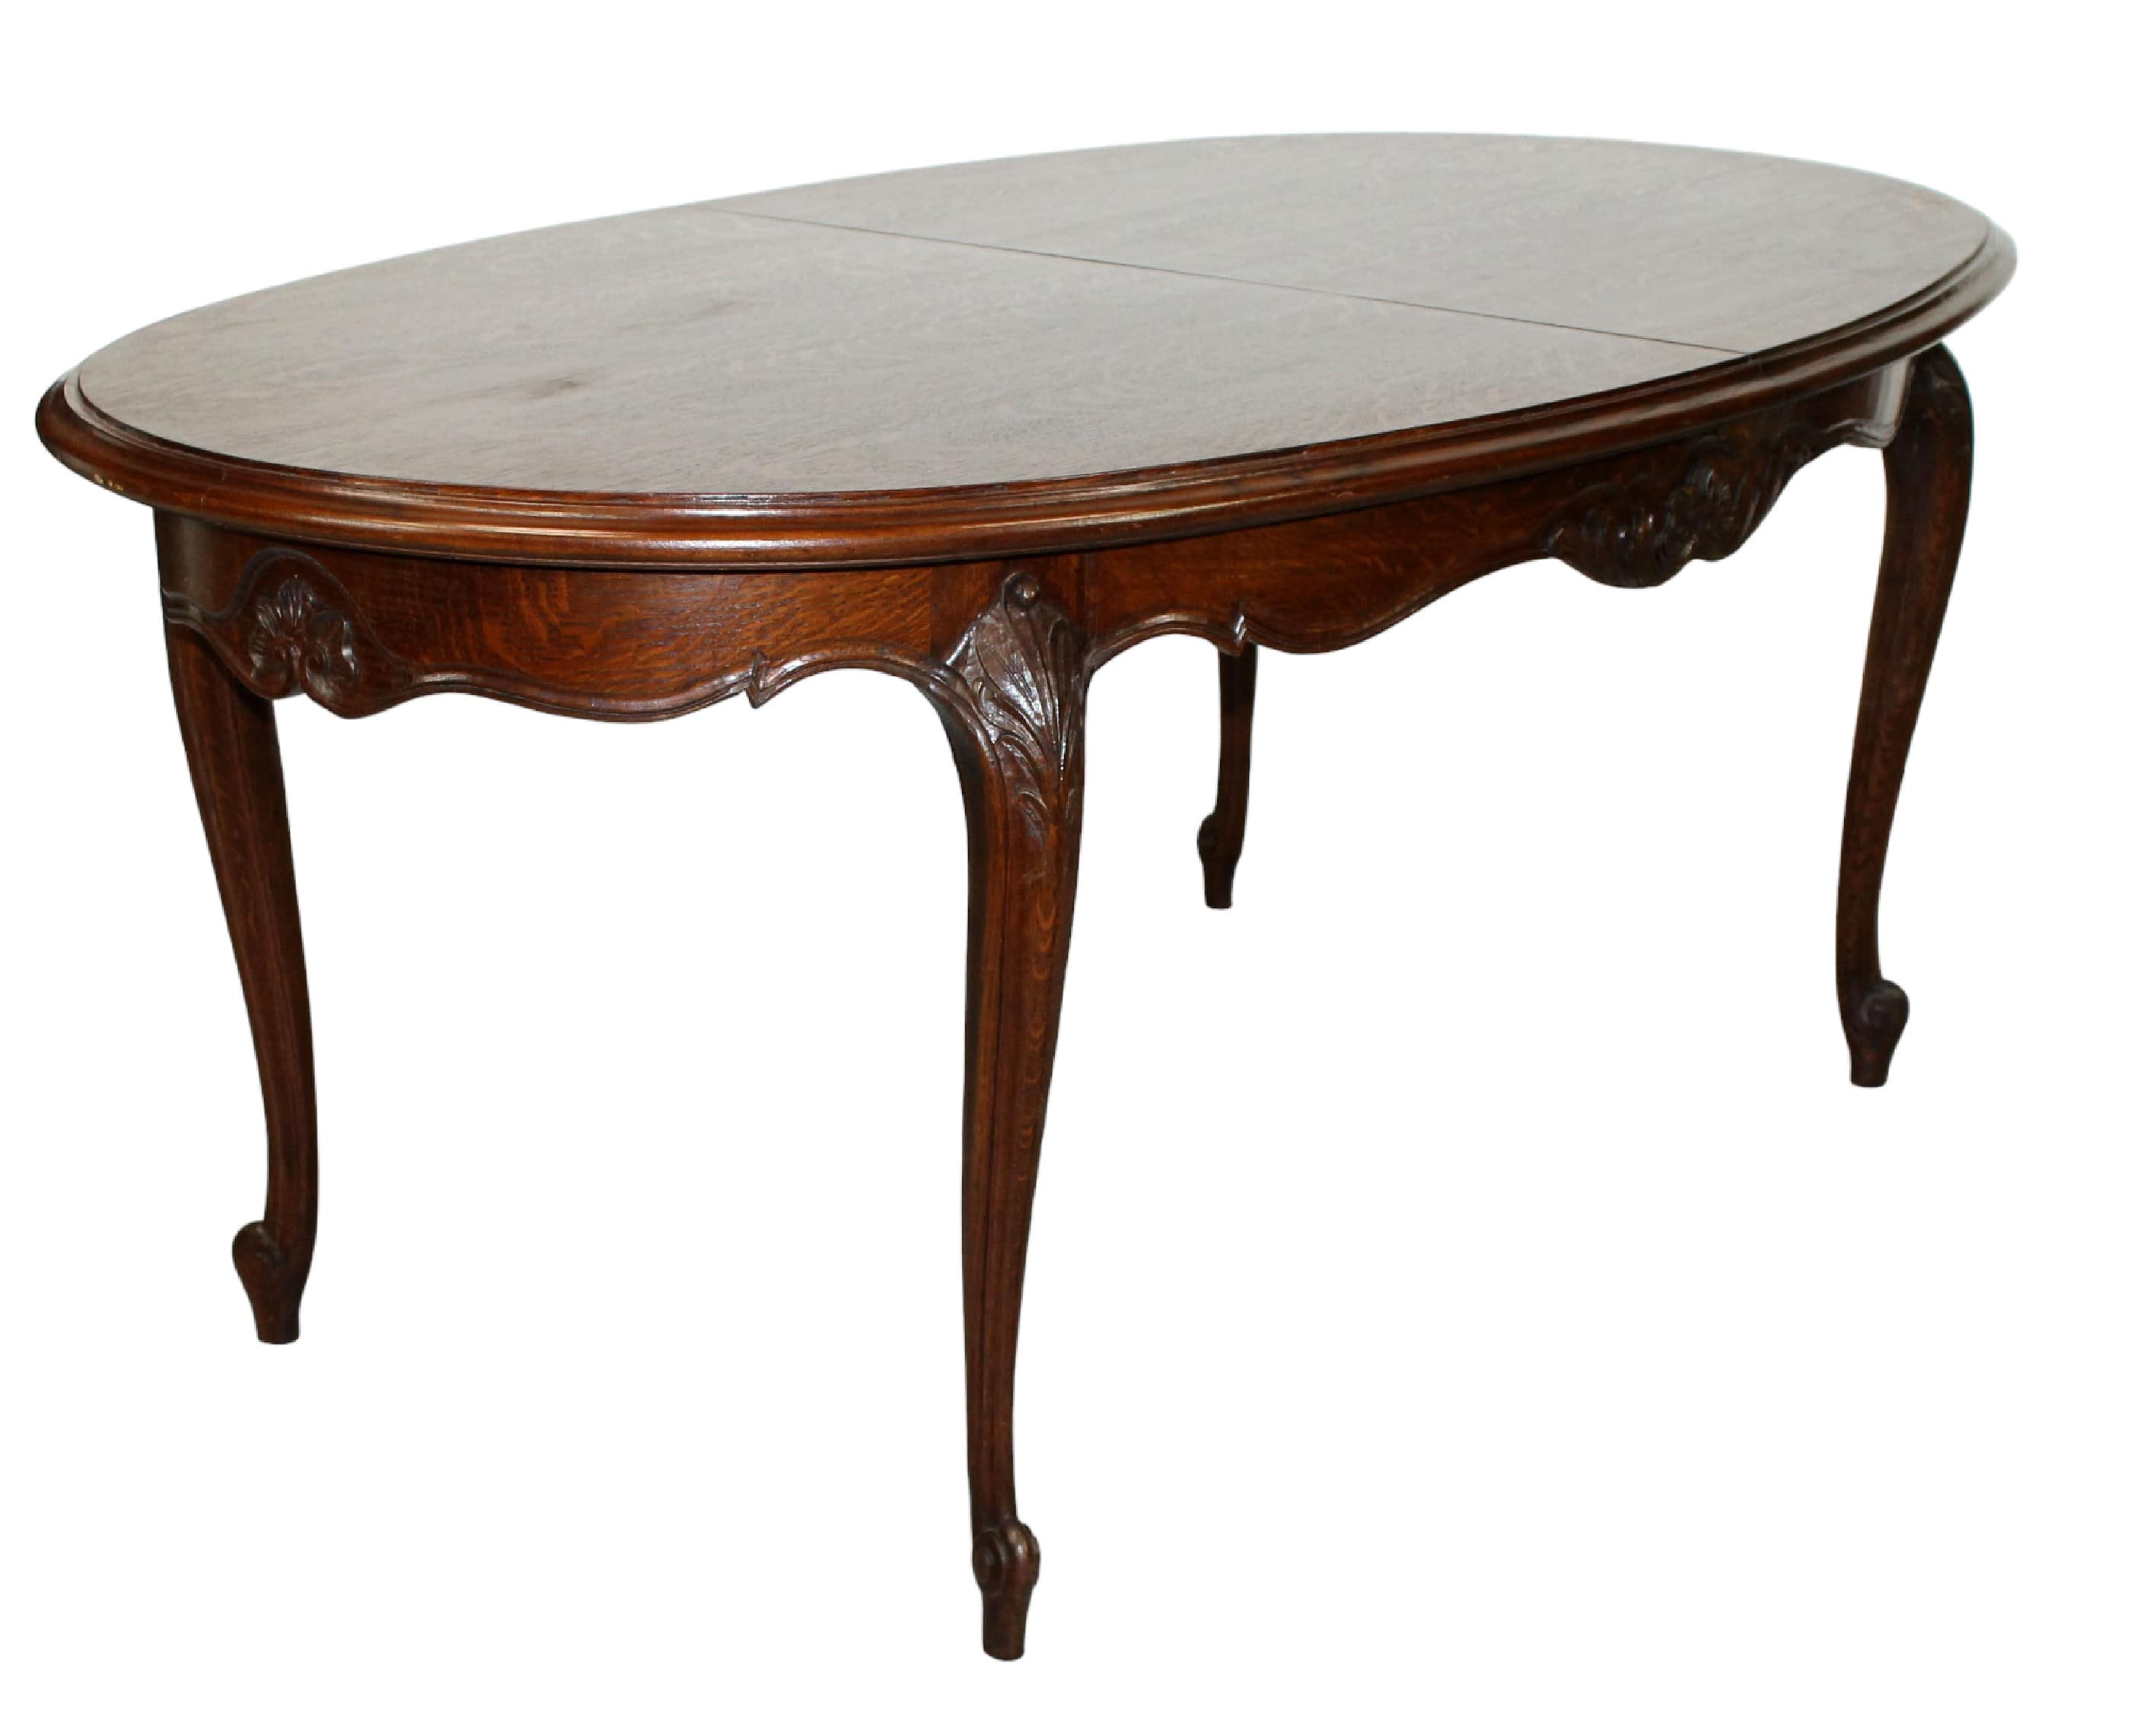 French Louis oval dining table with butterfly leaf